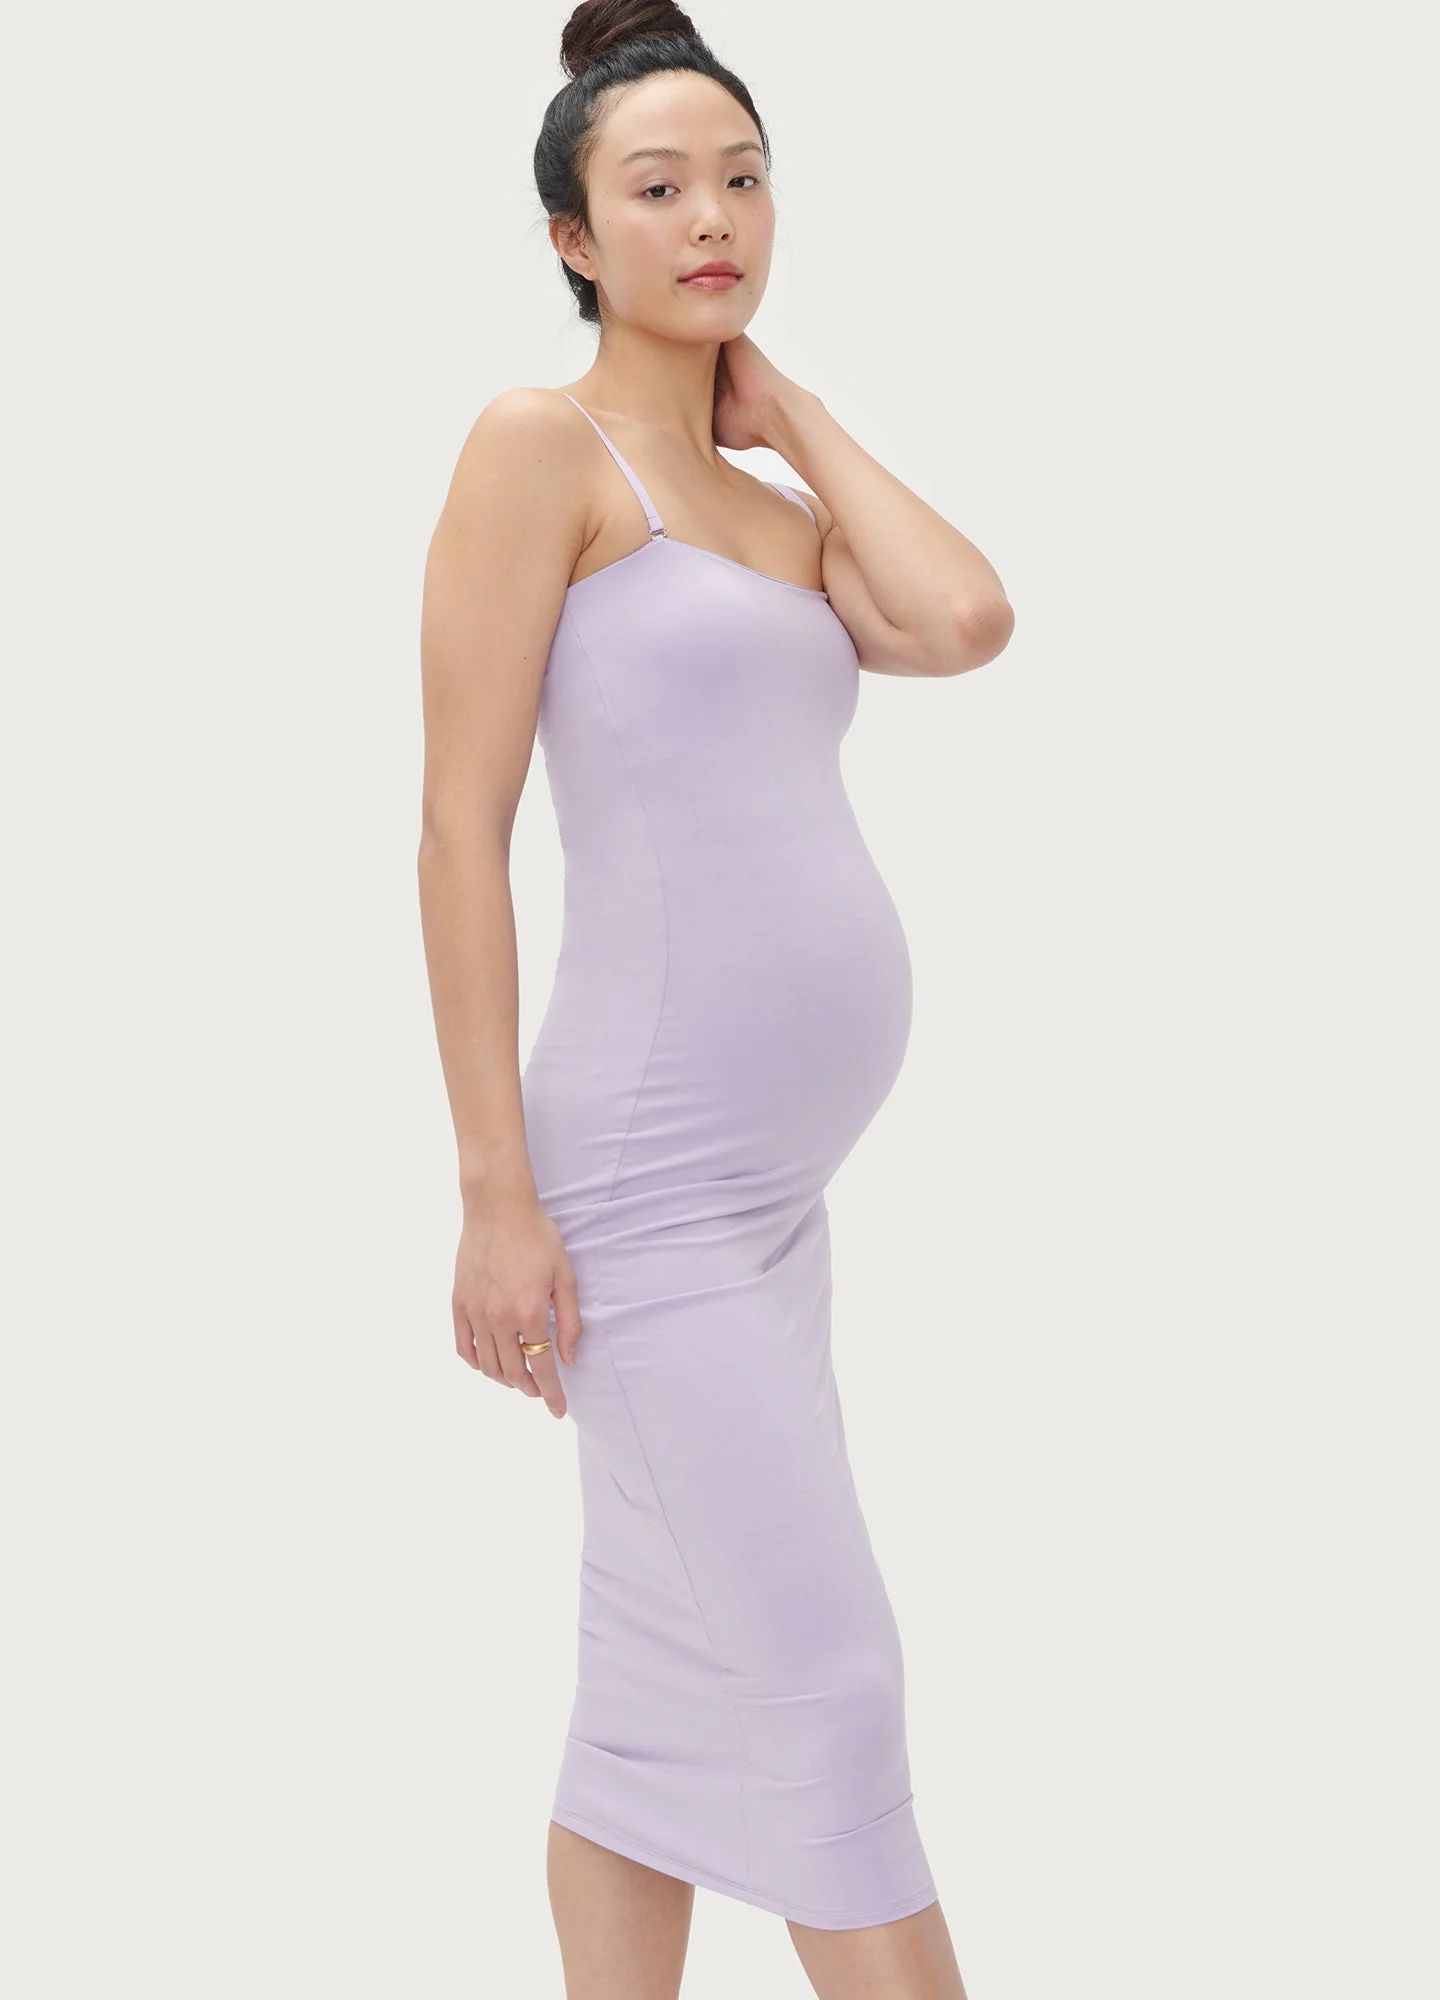 The Body Strapless Dress | Hatch Collection